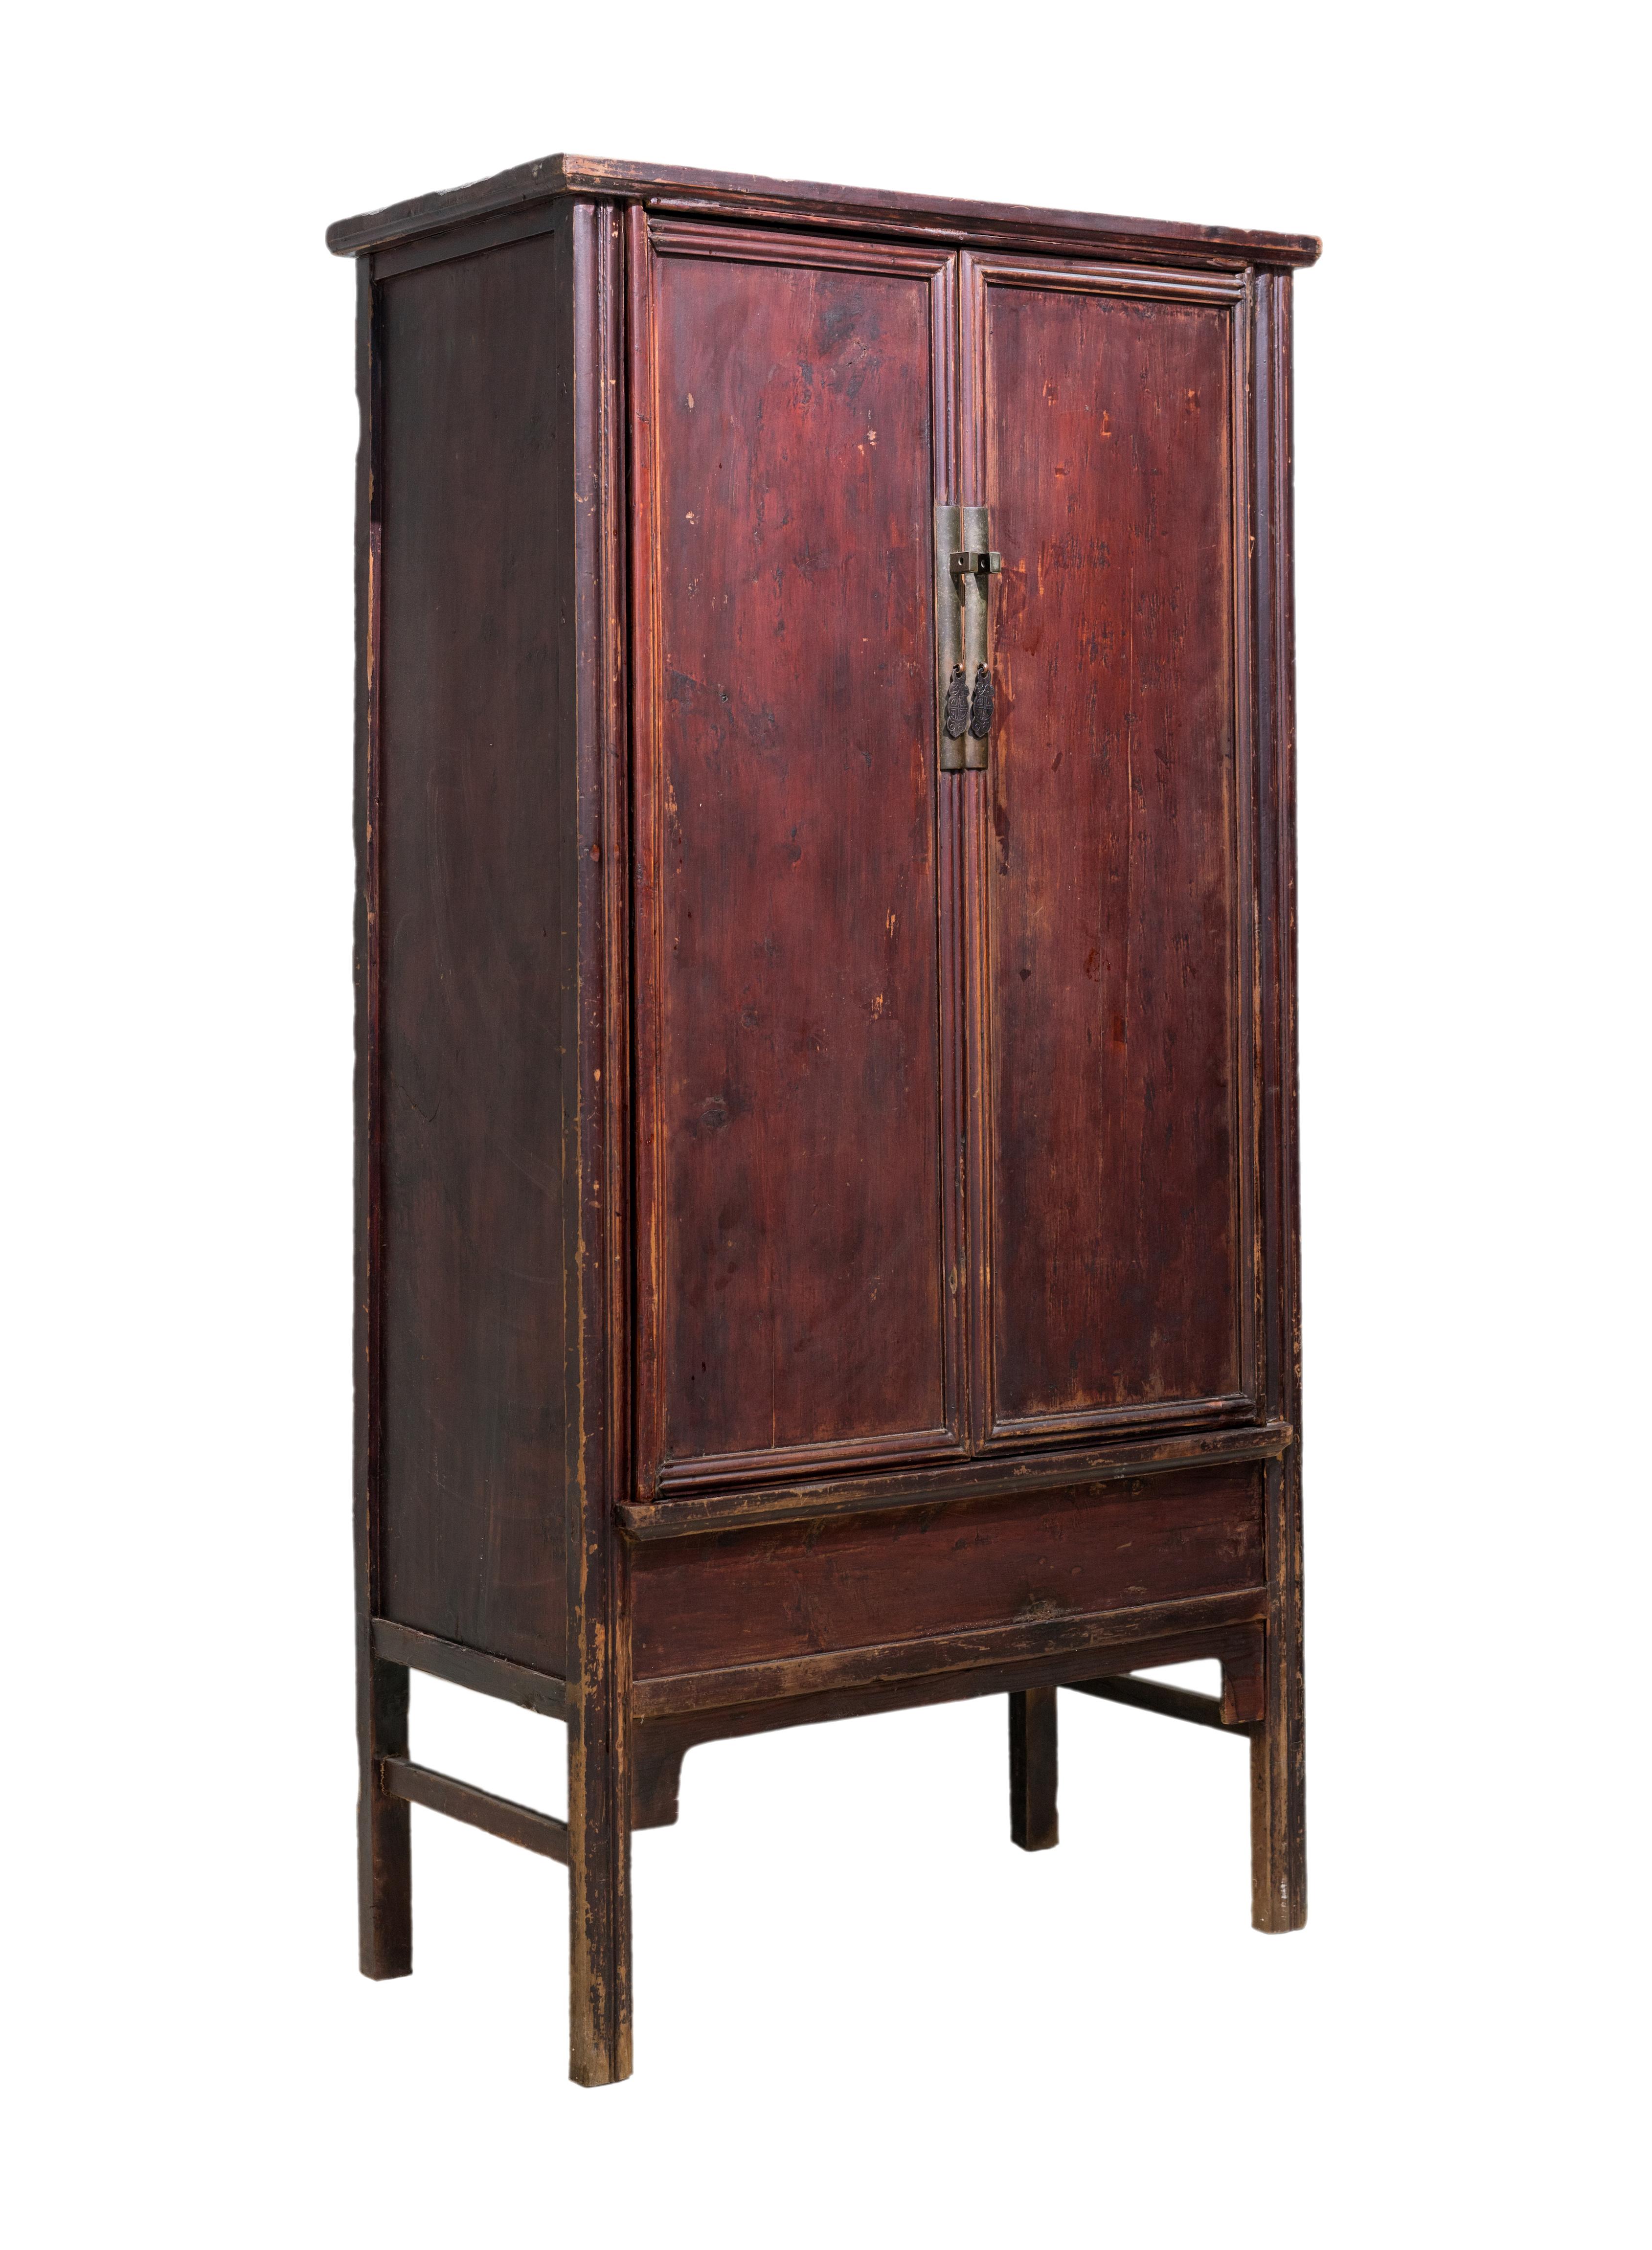 A deep red sloping-stile cabinet from Zhejiang province, China. Both legs are adorned with a single 